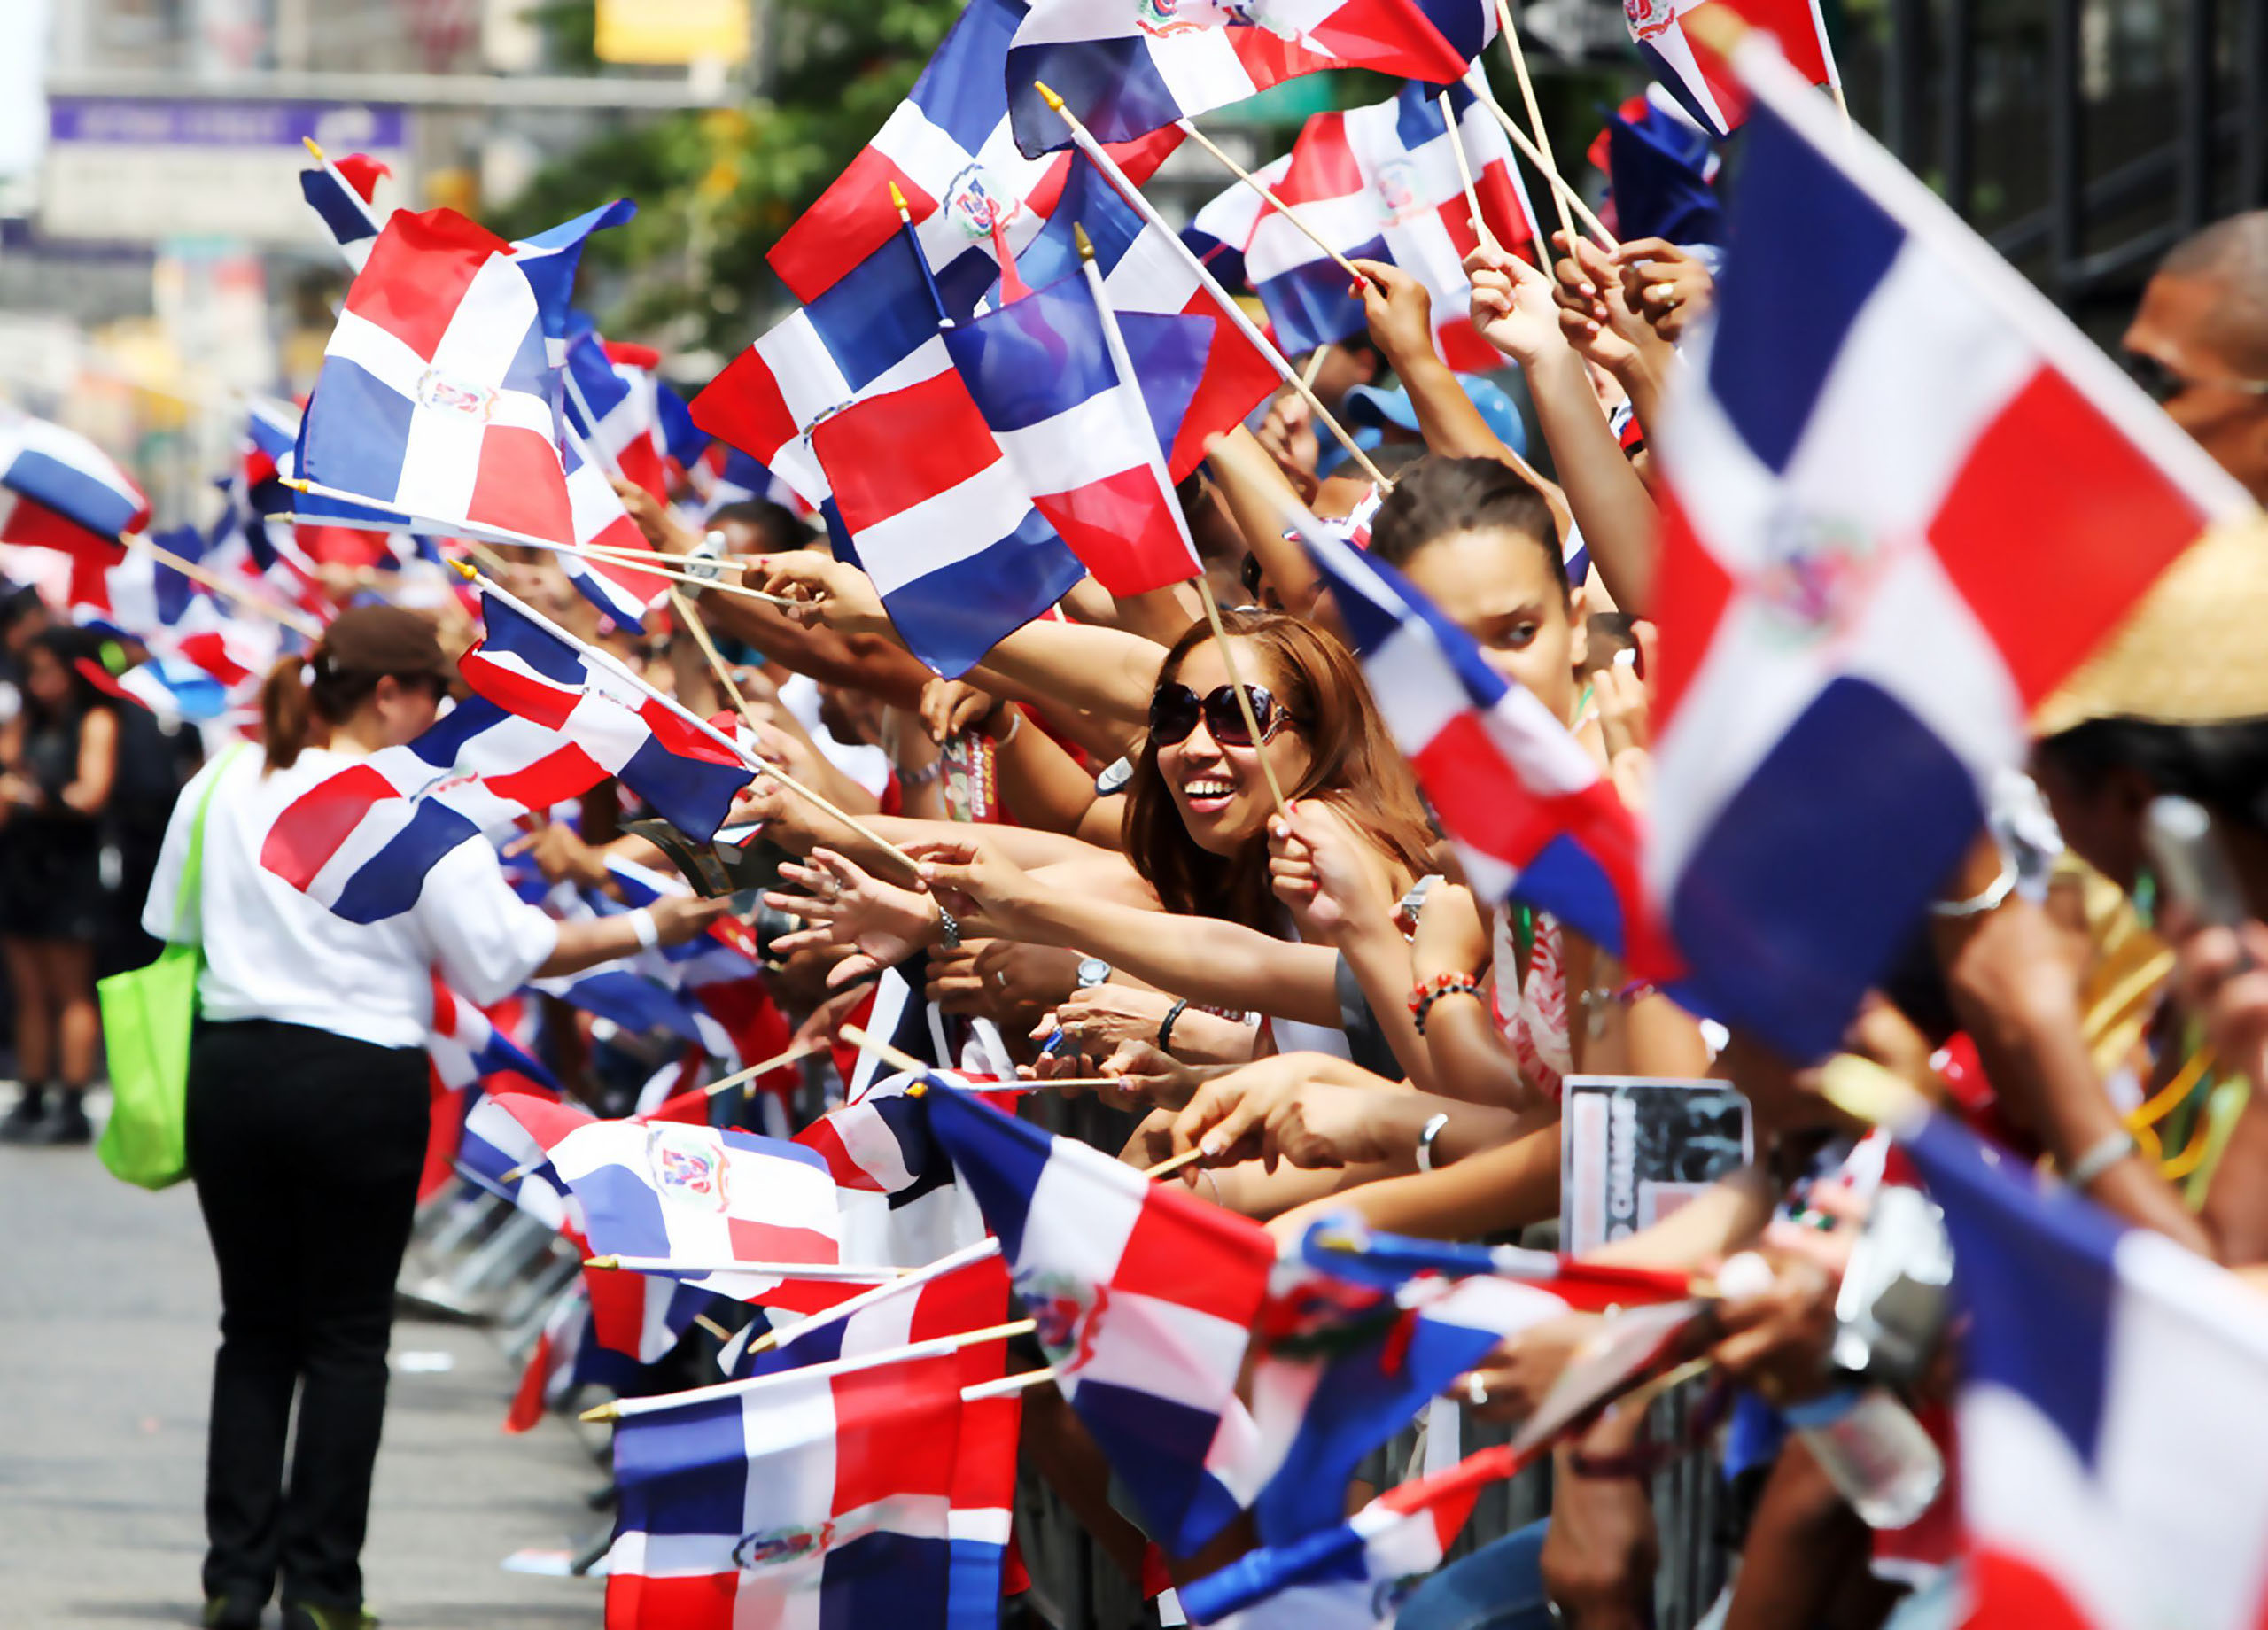 How to Do the Dominican Day Parade An 8 Step Guide